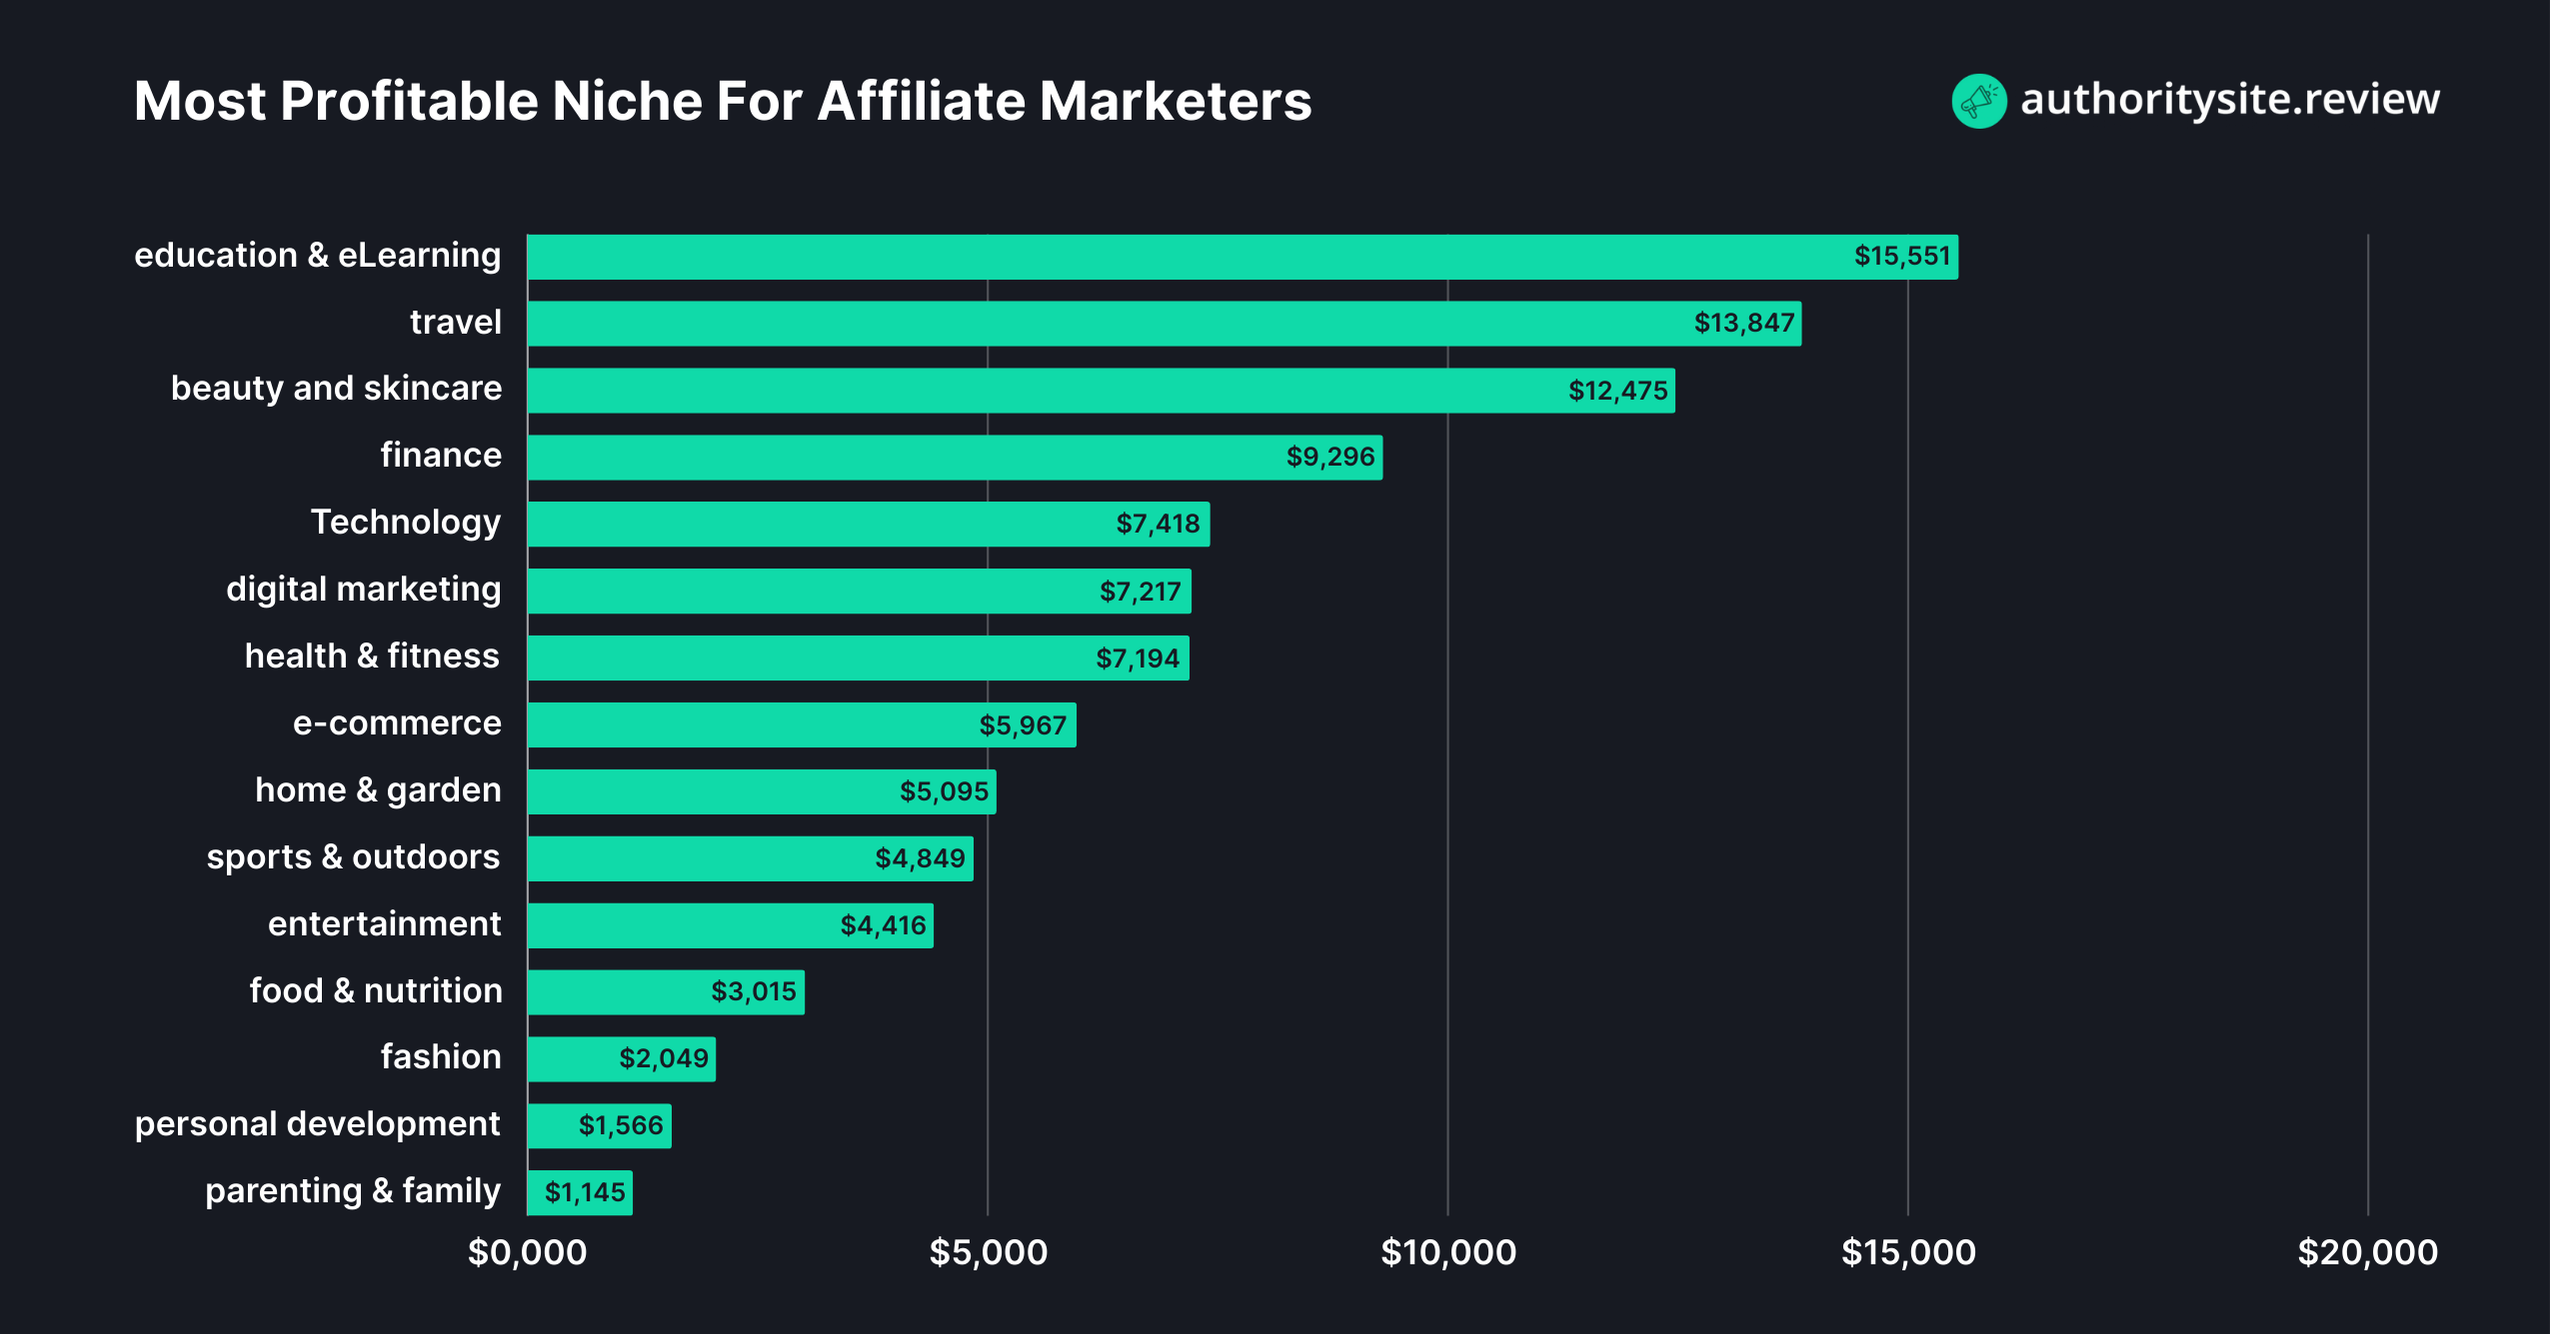 Most Profitable Niche For Affiliate Marketers